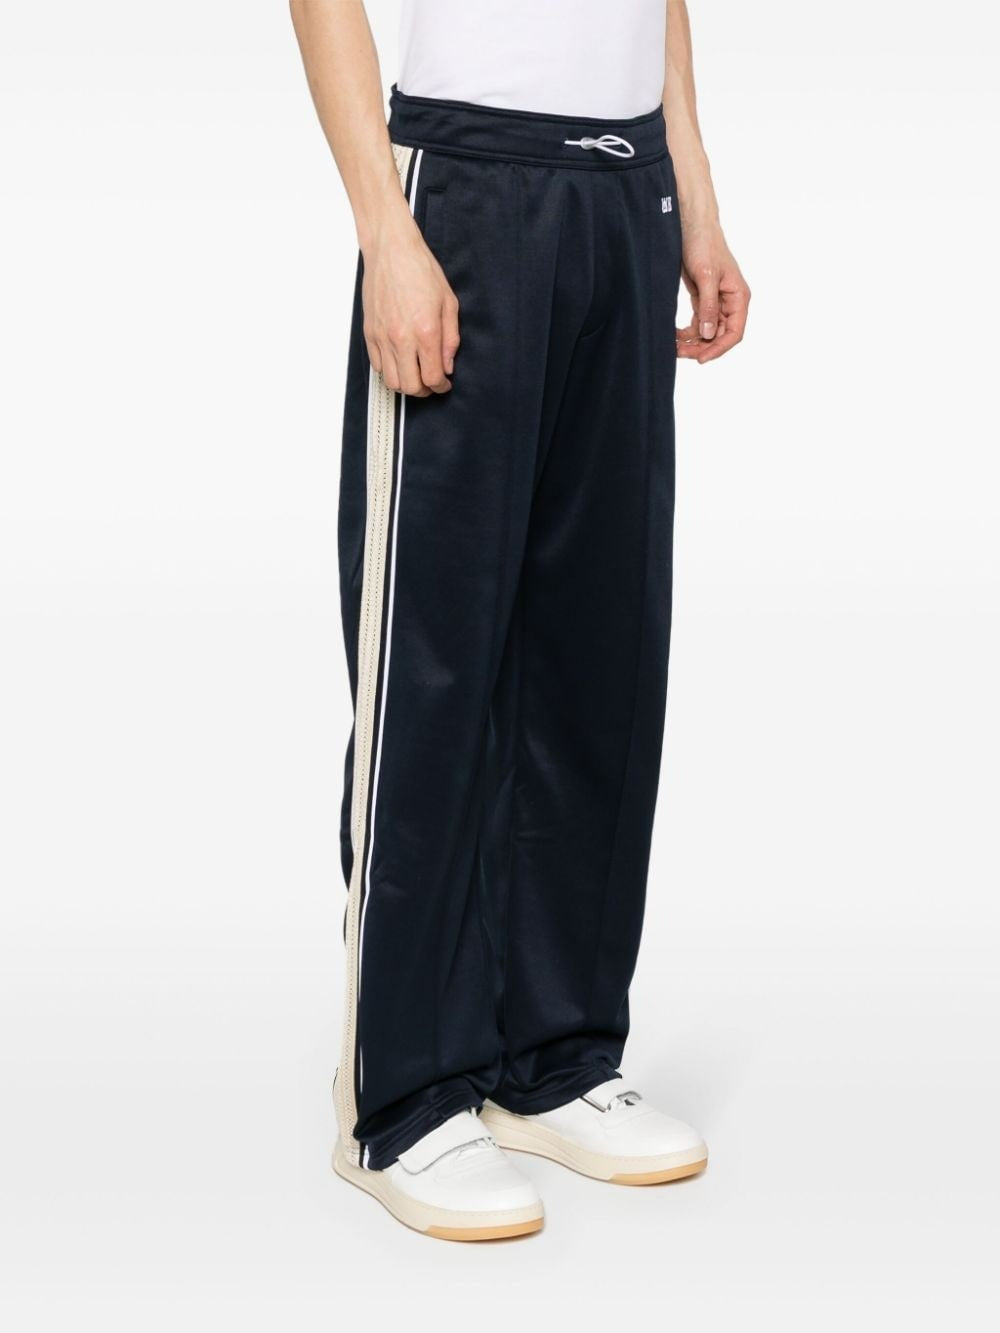 WALES BONNER-MANTRA JERSEY TROUSERS-